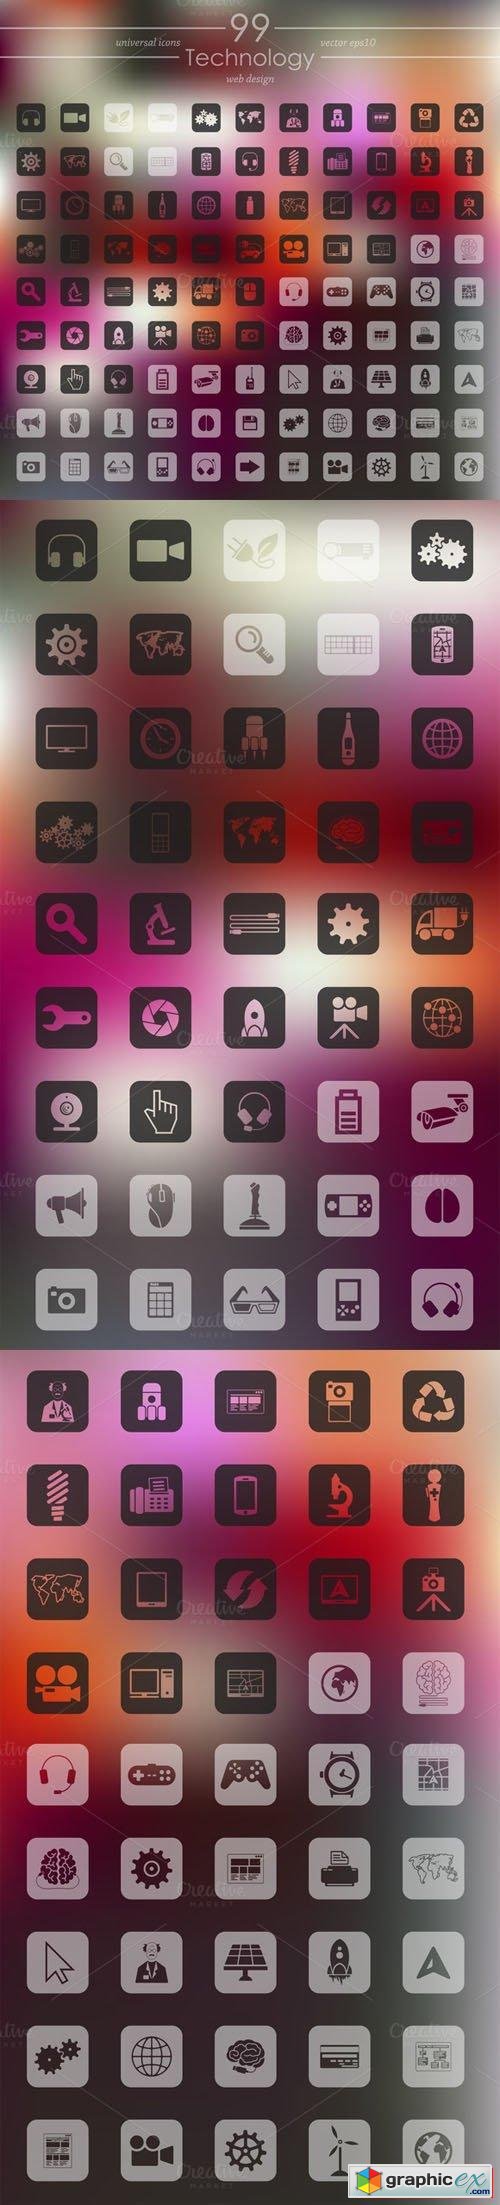  99 Technology Icons 